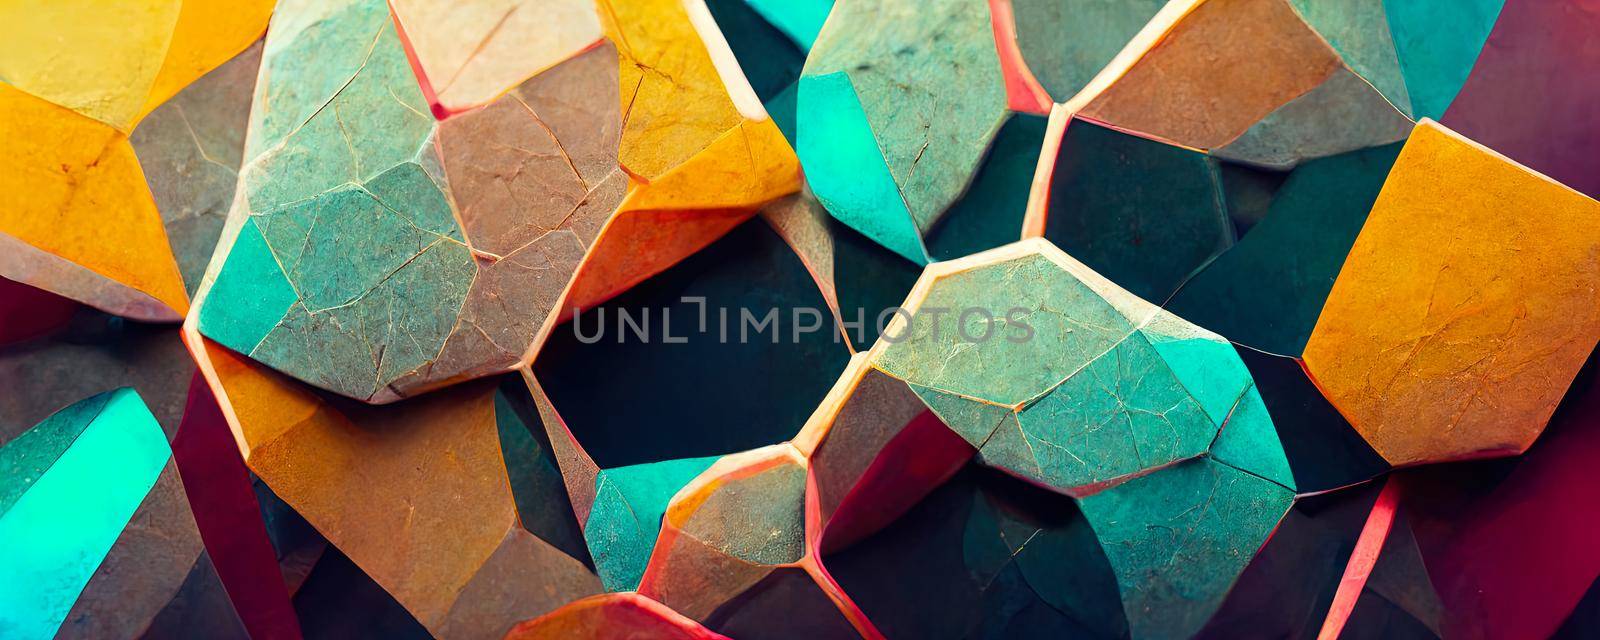 Abstract color texture. Modern futuristic pattern